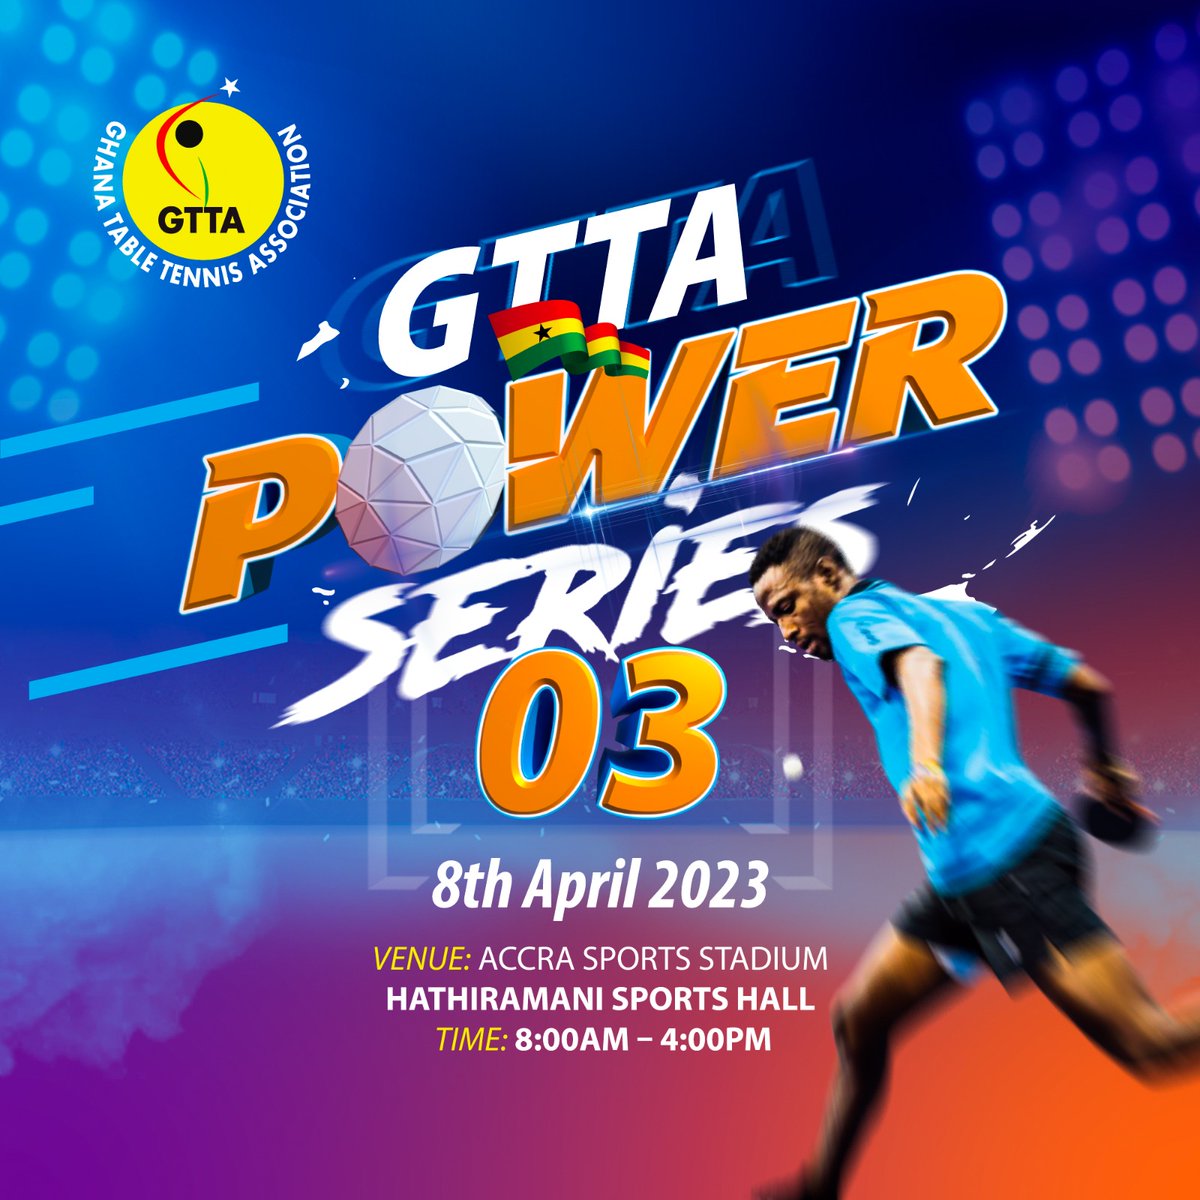 Organized by Ghana Table Tennis Association, GTTA, #POWERSERIES3 takes place tomorrow.

More updates on this table tennis event, will be soon.
#tabletennis
#tabletennisevents 
Let's #playtabletennis